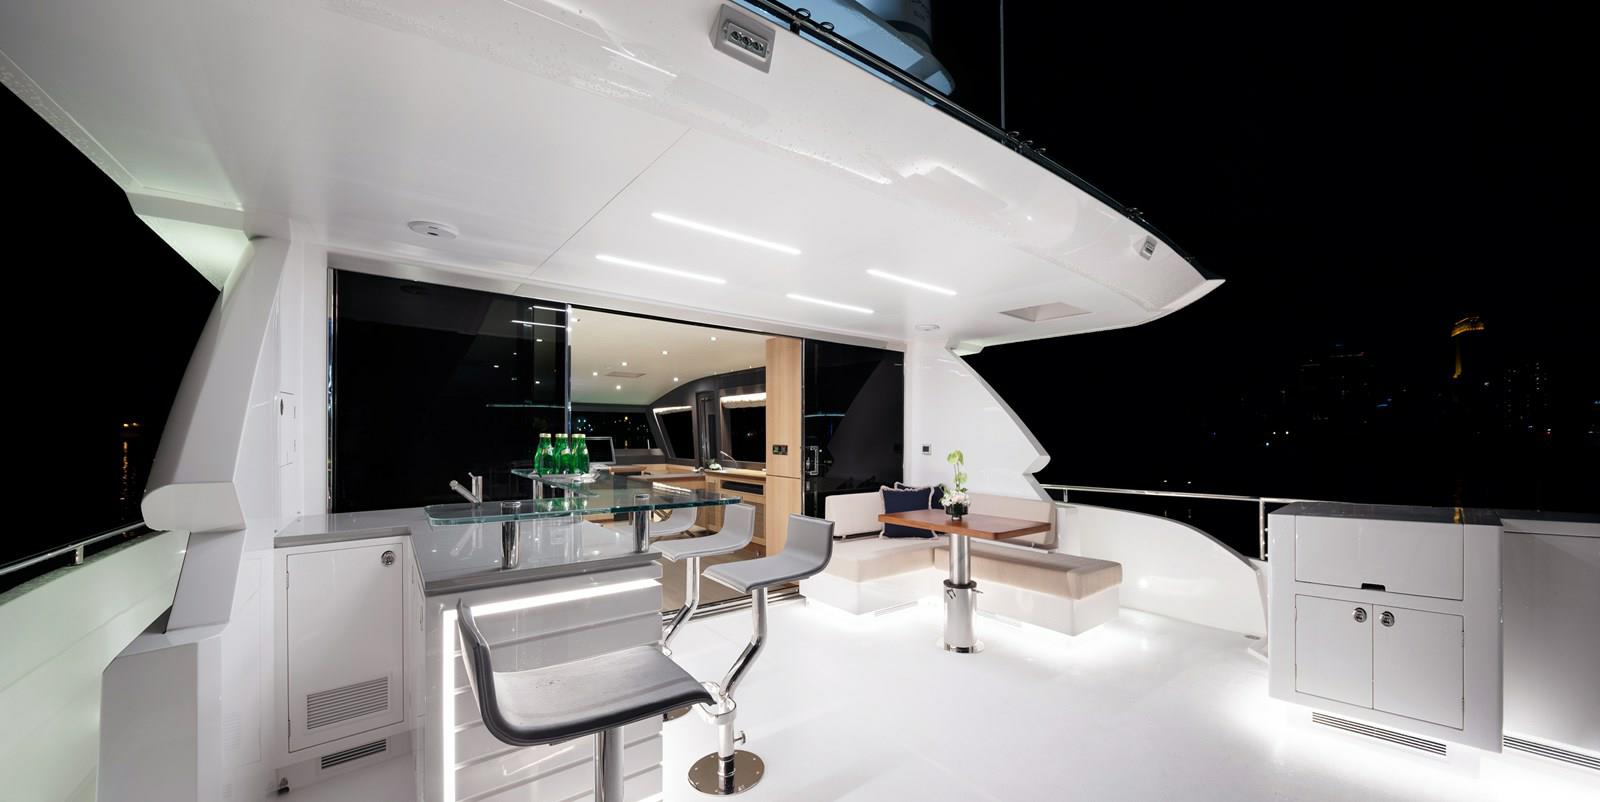 FD87 Aqua Life boat deck with bar, barstools and dinette.